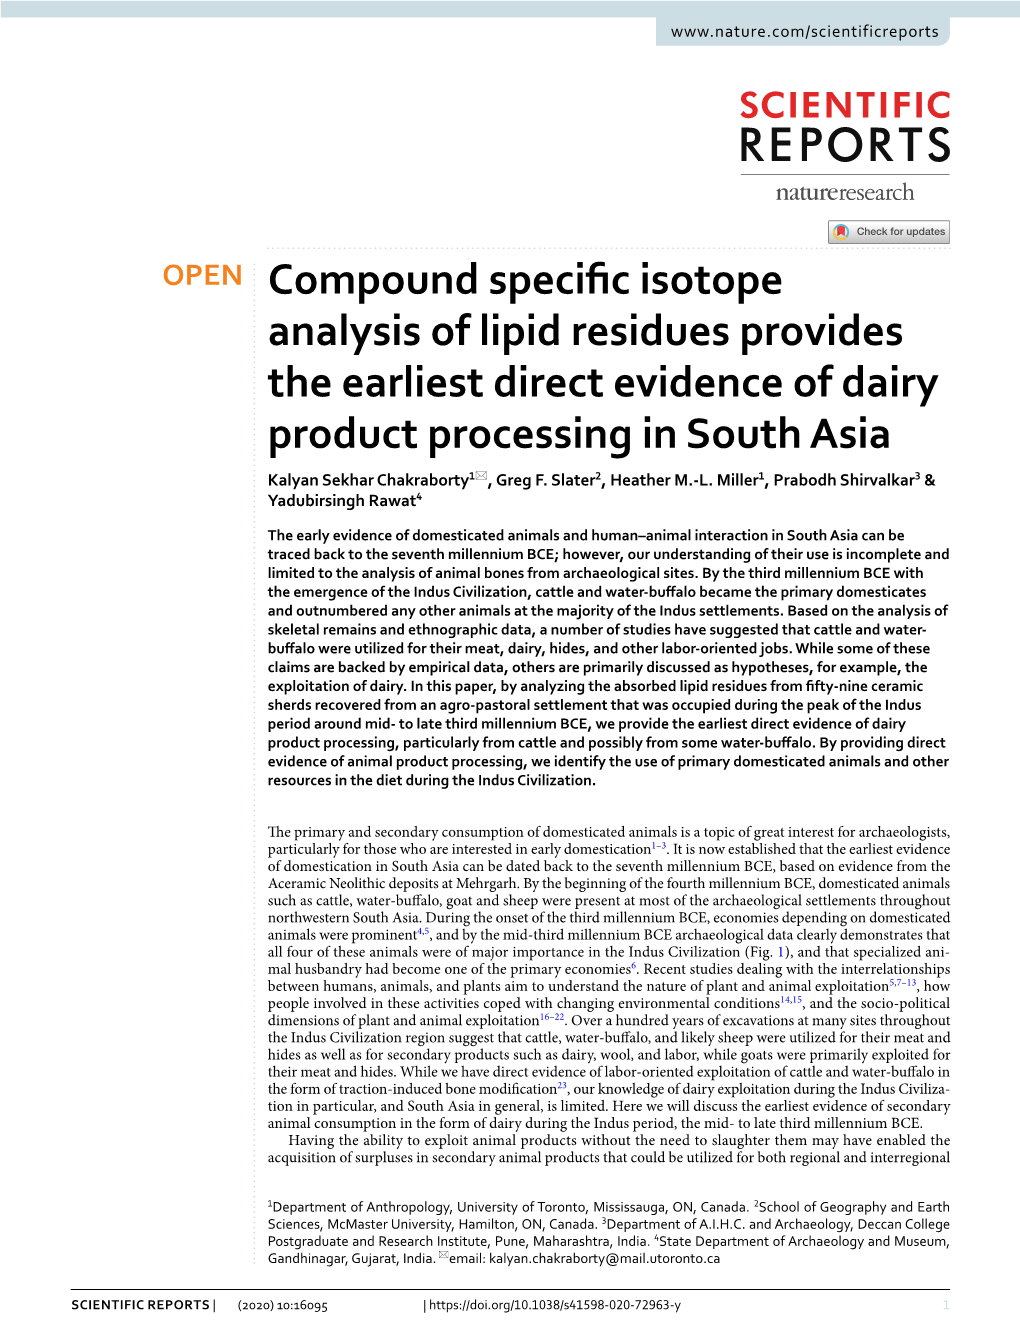 Compound Specific Isotope Analysis of Lipid Residues Provides the Earliest